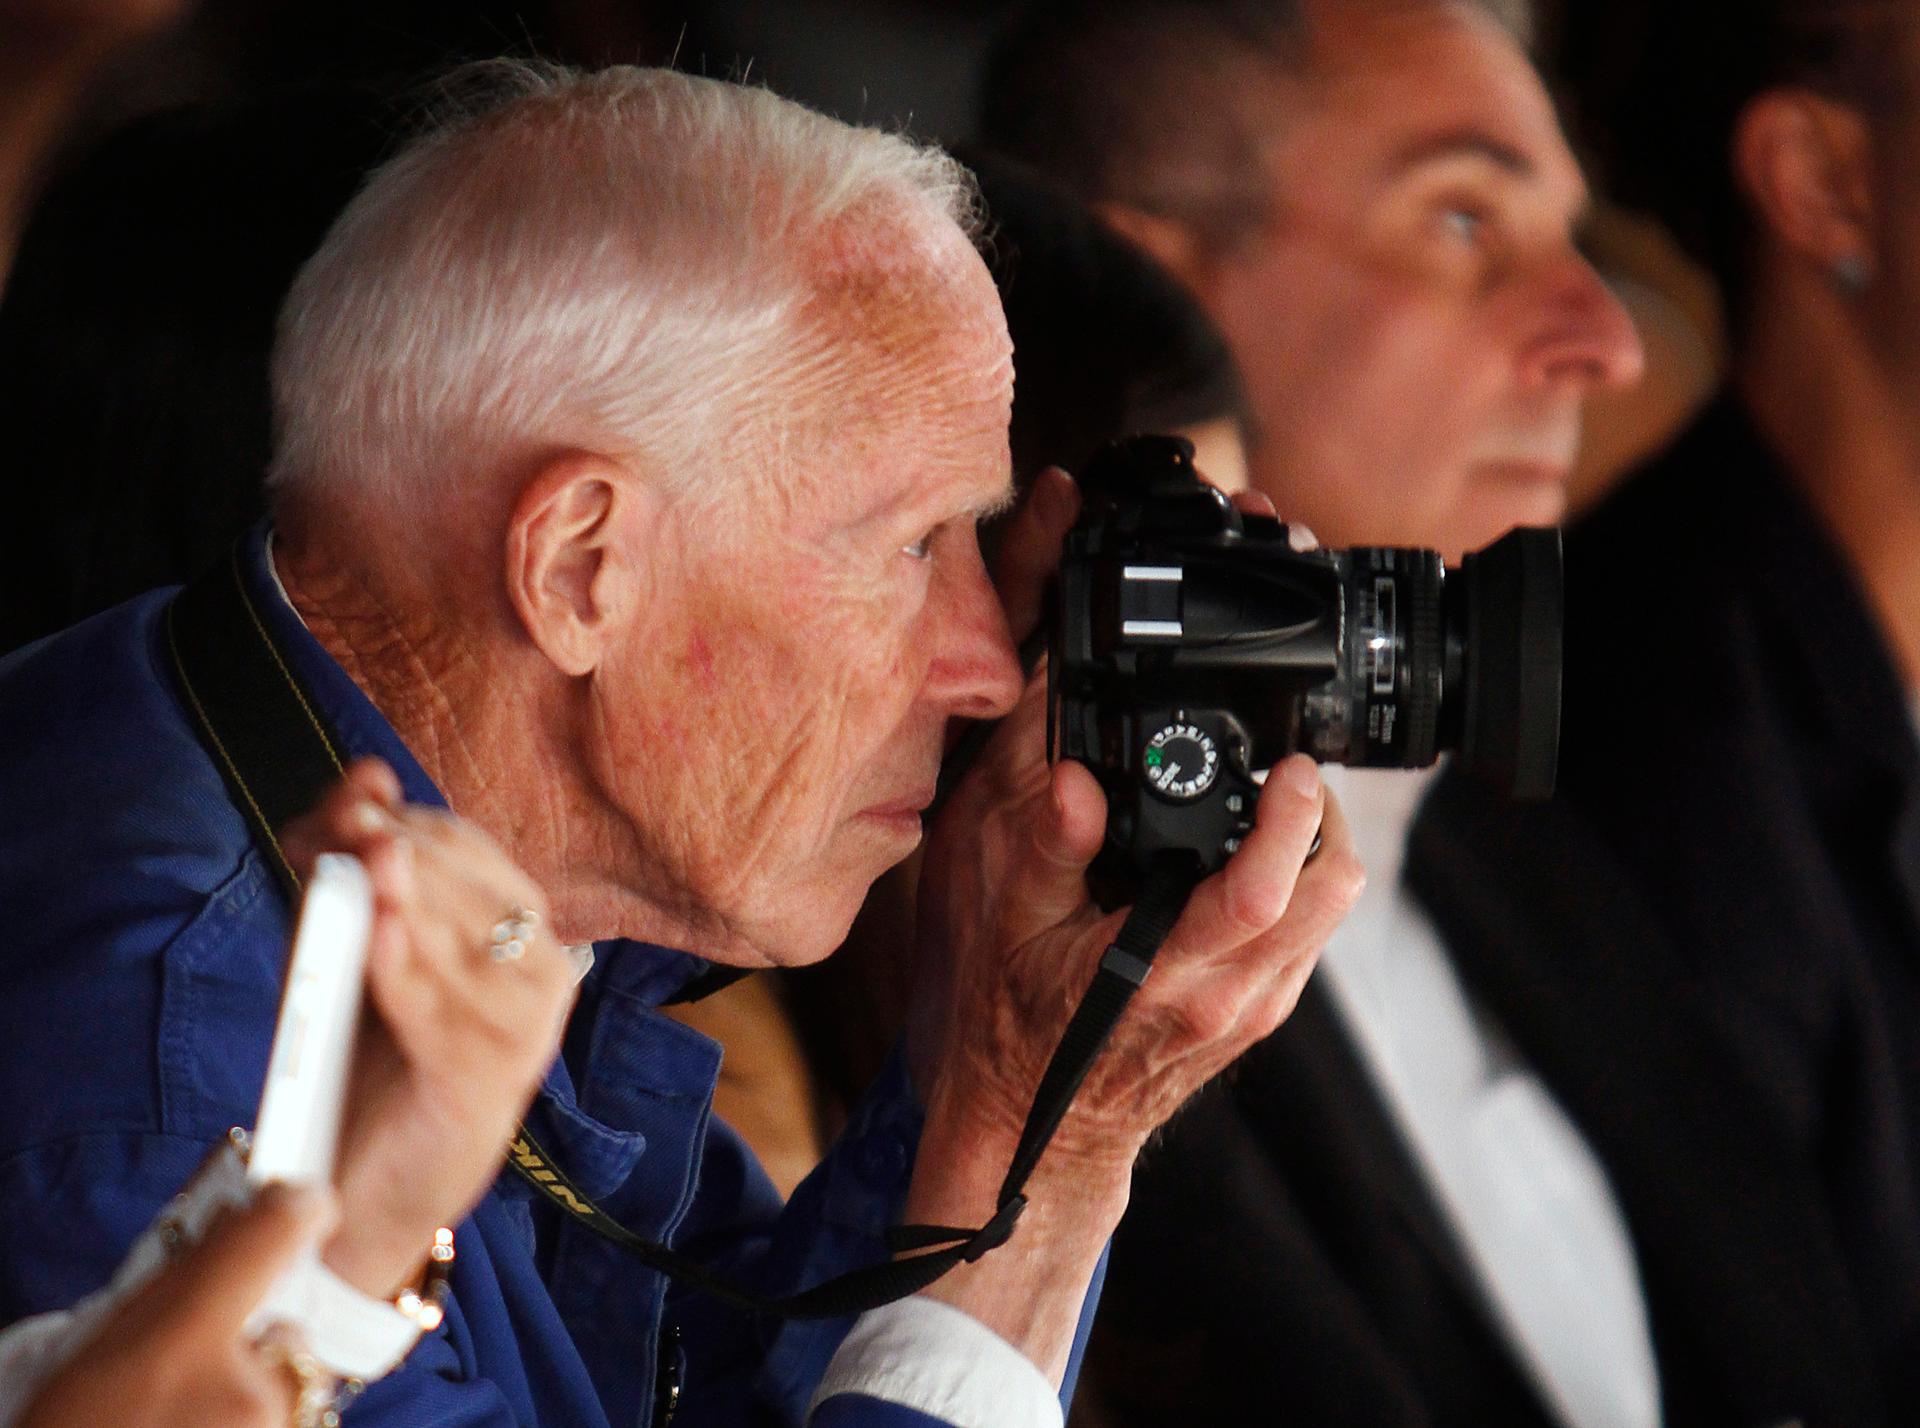 Bill Cunningham takes photos during the Naeem Khan Spring/Summer 2013 collection show at New York Fashion Week in 2012.